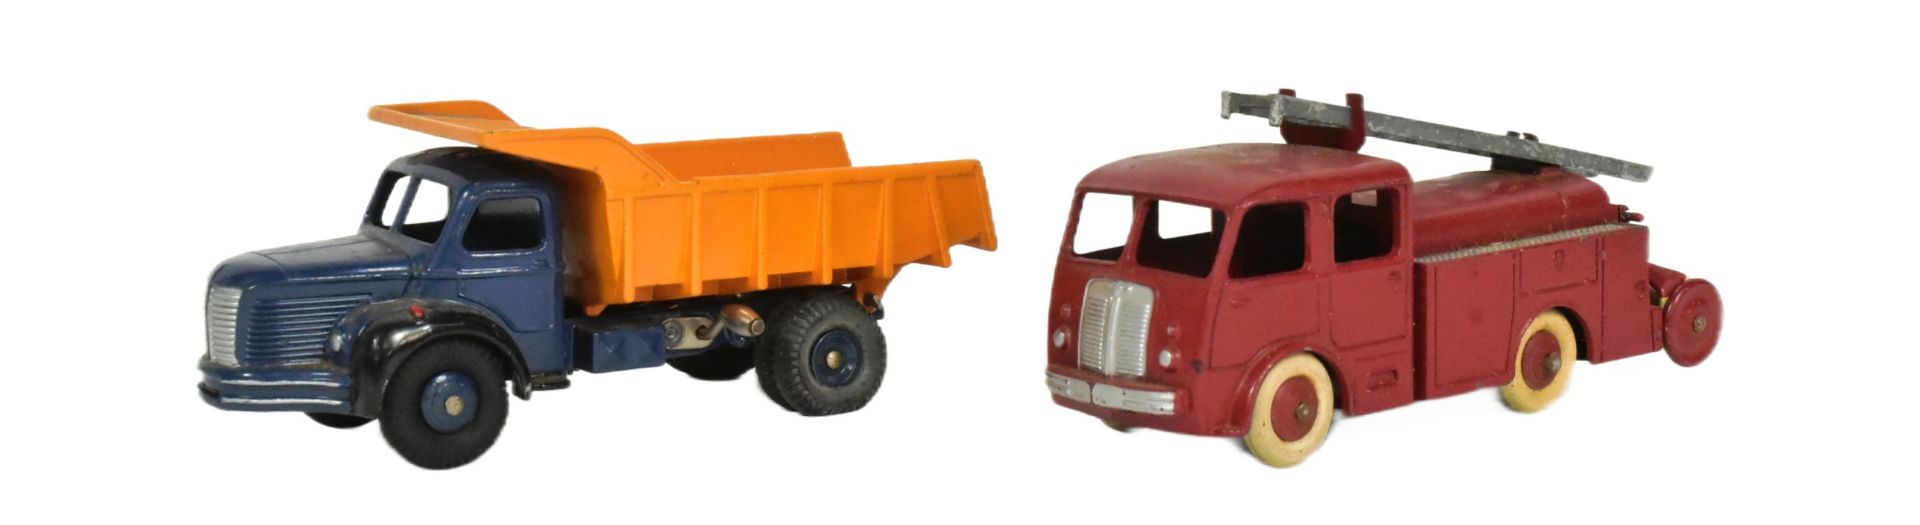 DIECAST - FRENCH DINKY TOYS - FIRE RESCUE & DUMPSTER TRUCK